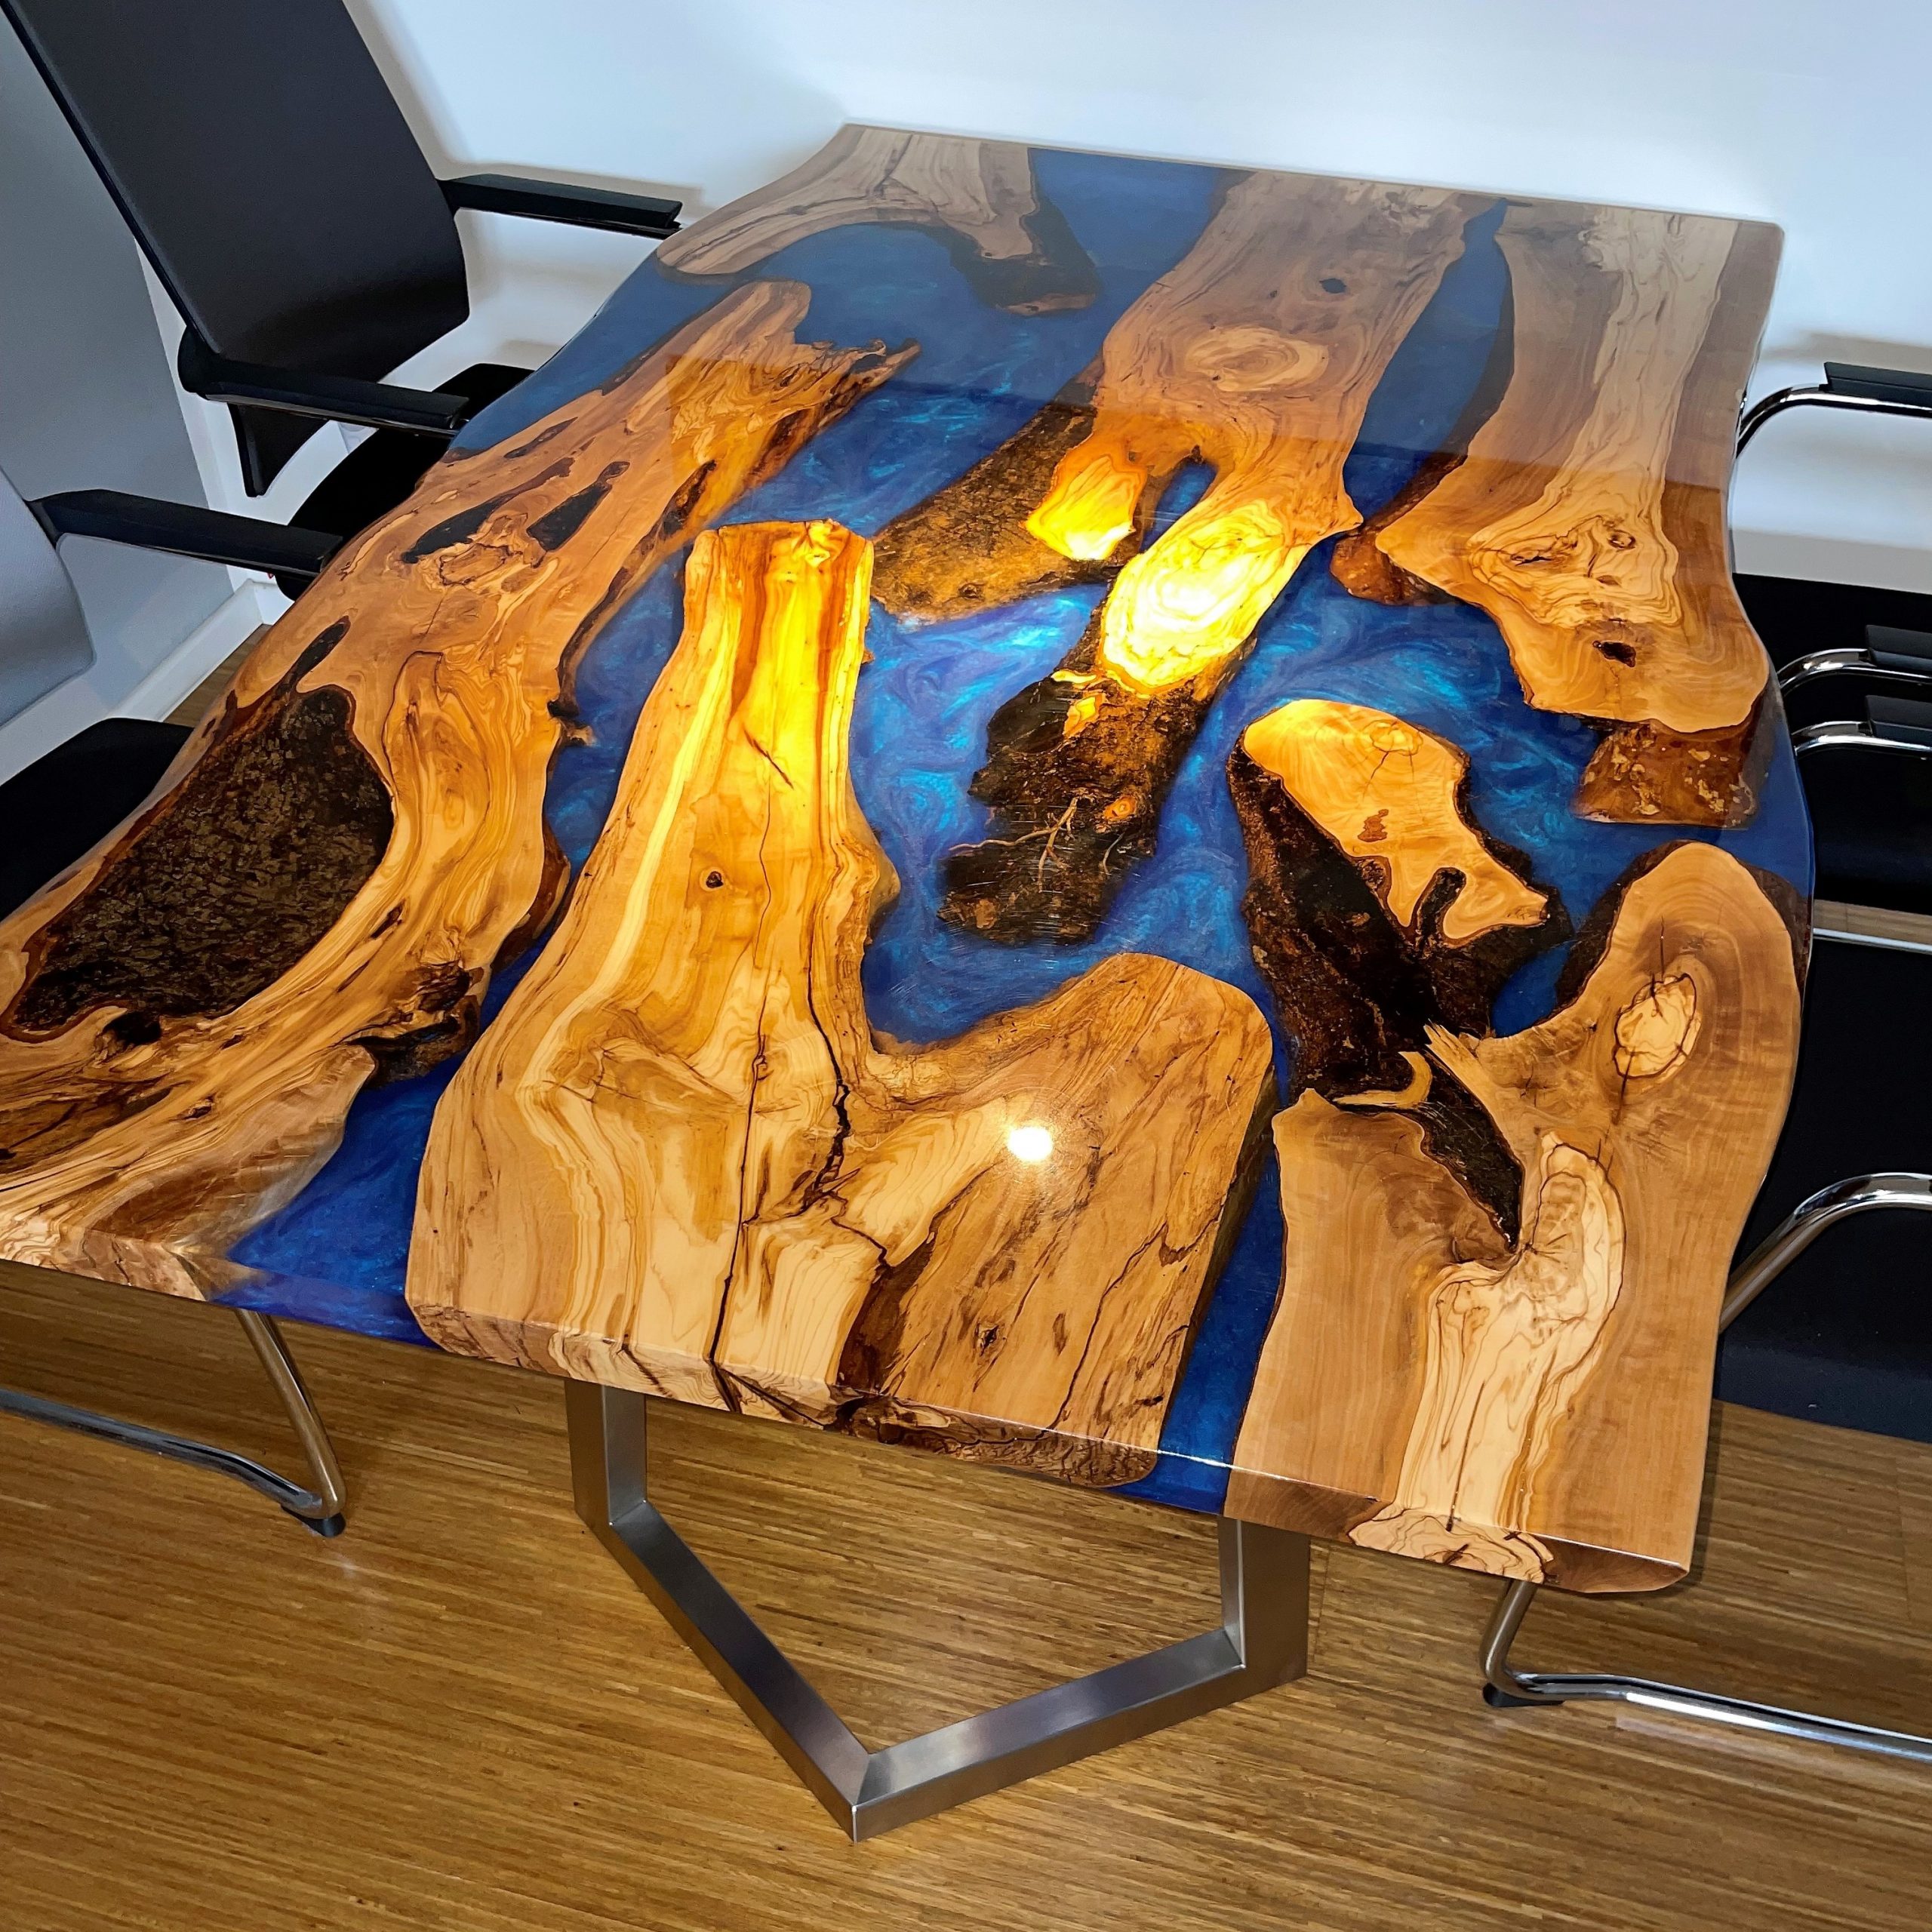 https://oh-my-deer.com/wp-content/uploads/2021/08/Oliven_Epoxy_Table-scaled.jpg